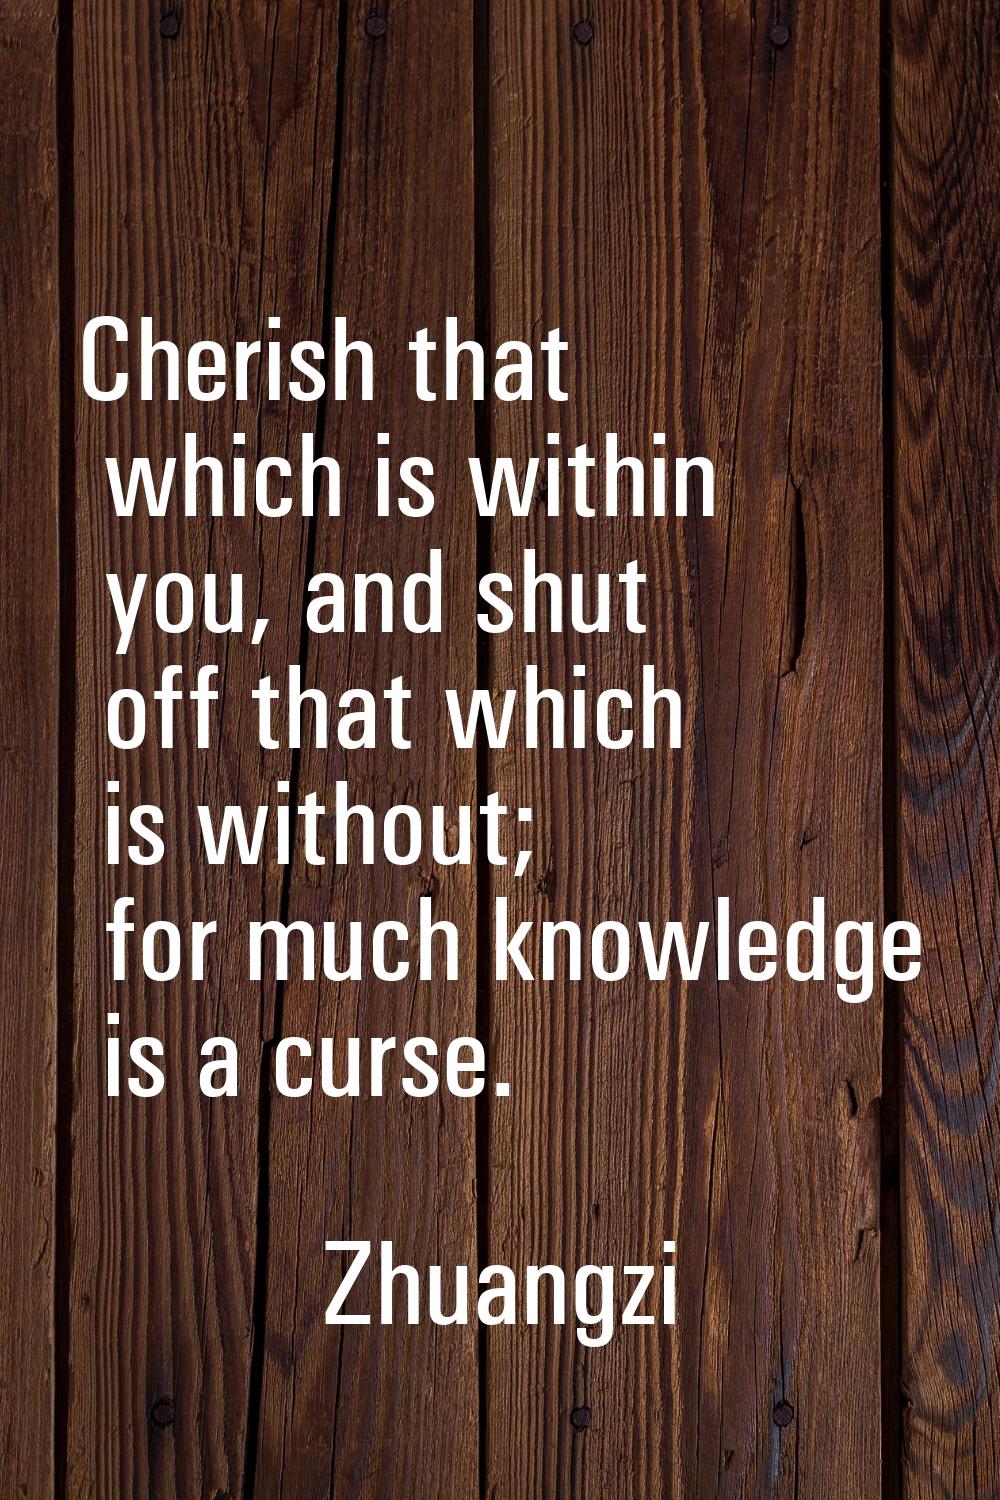 Cherish that which is within you, and shut off that which is without; for much knowledge is a curse